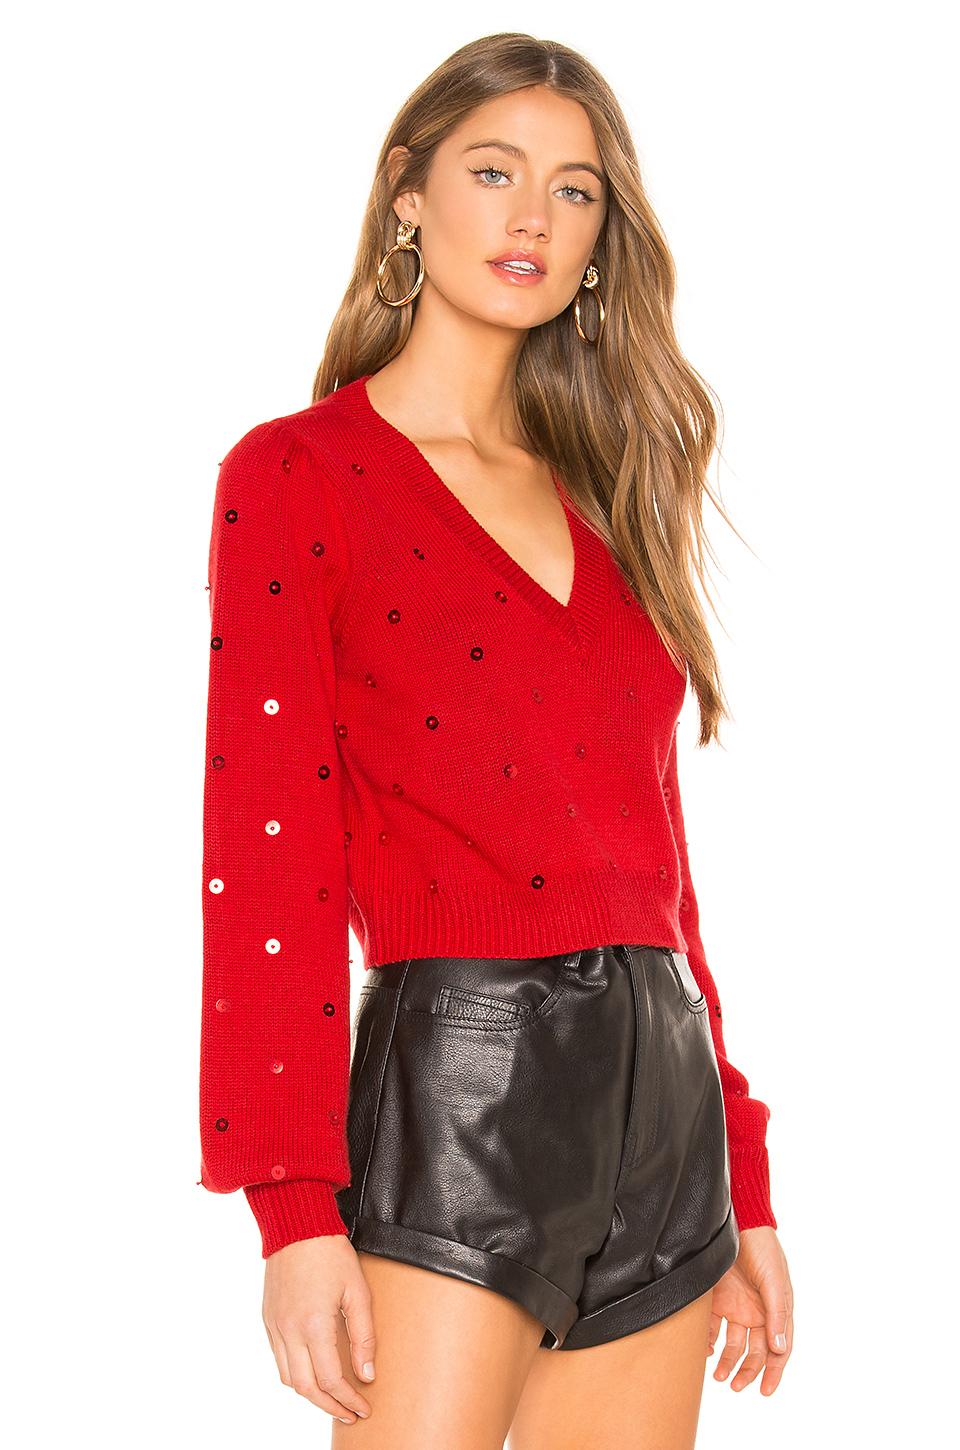 MAJORELLE Sequin Sweater in Red - Lyst